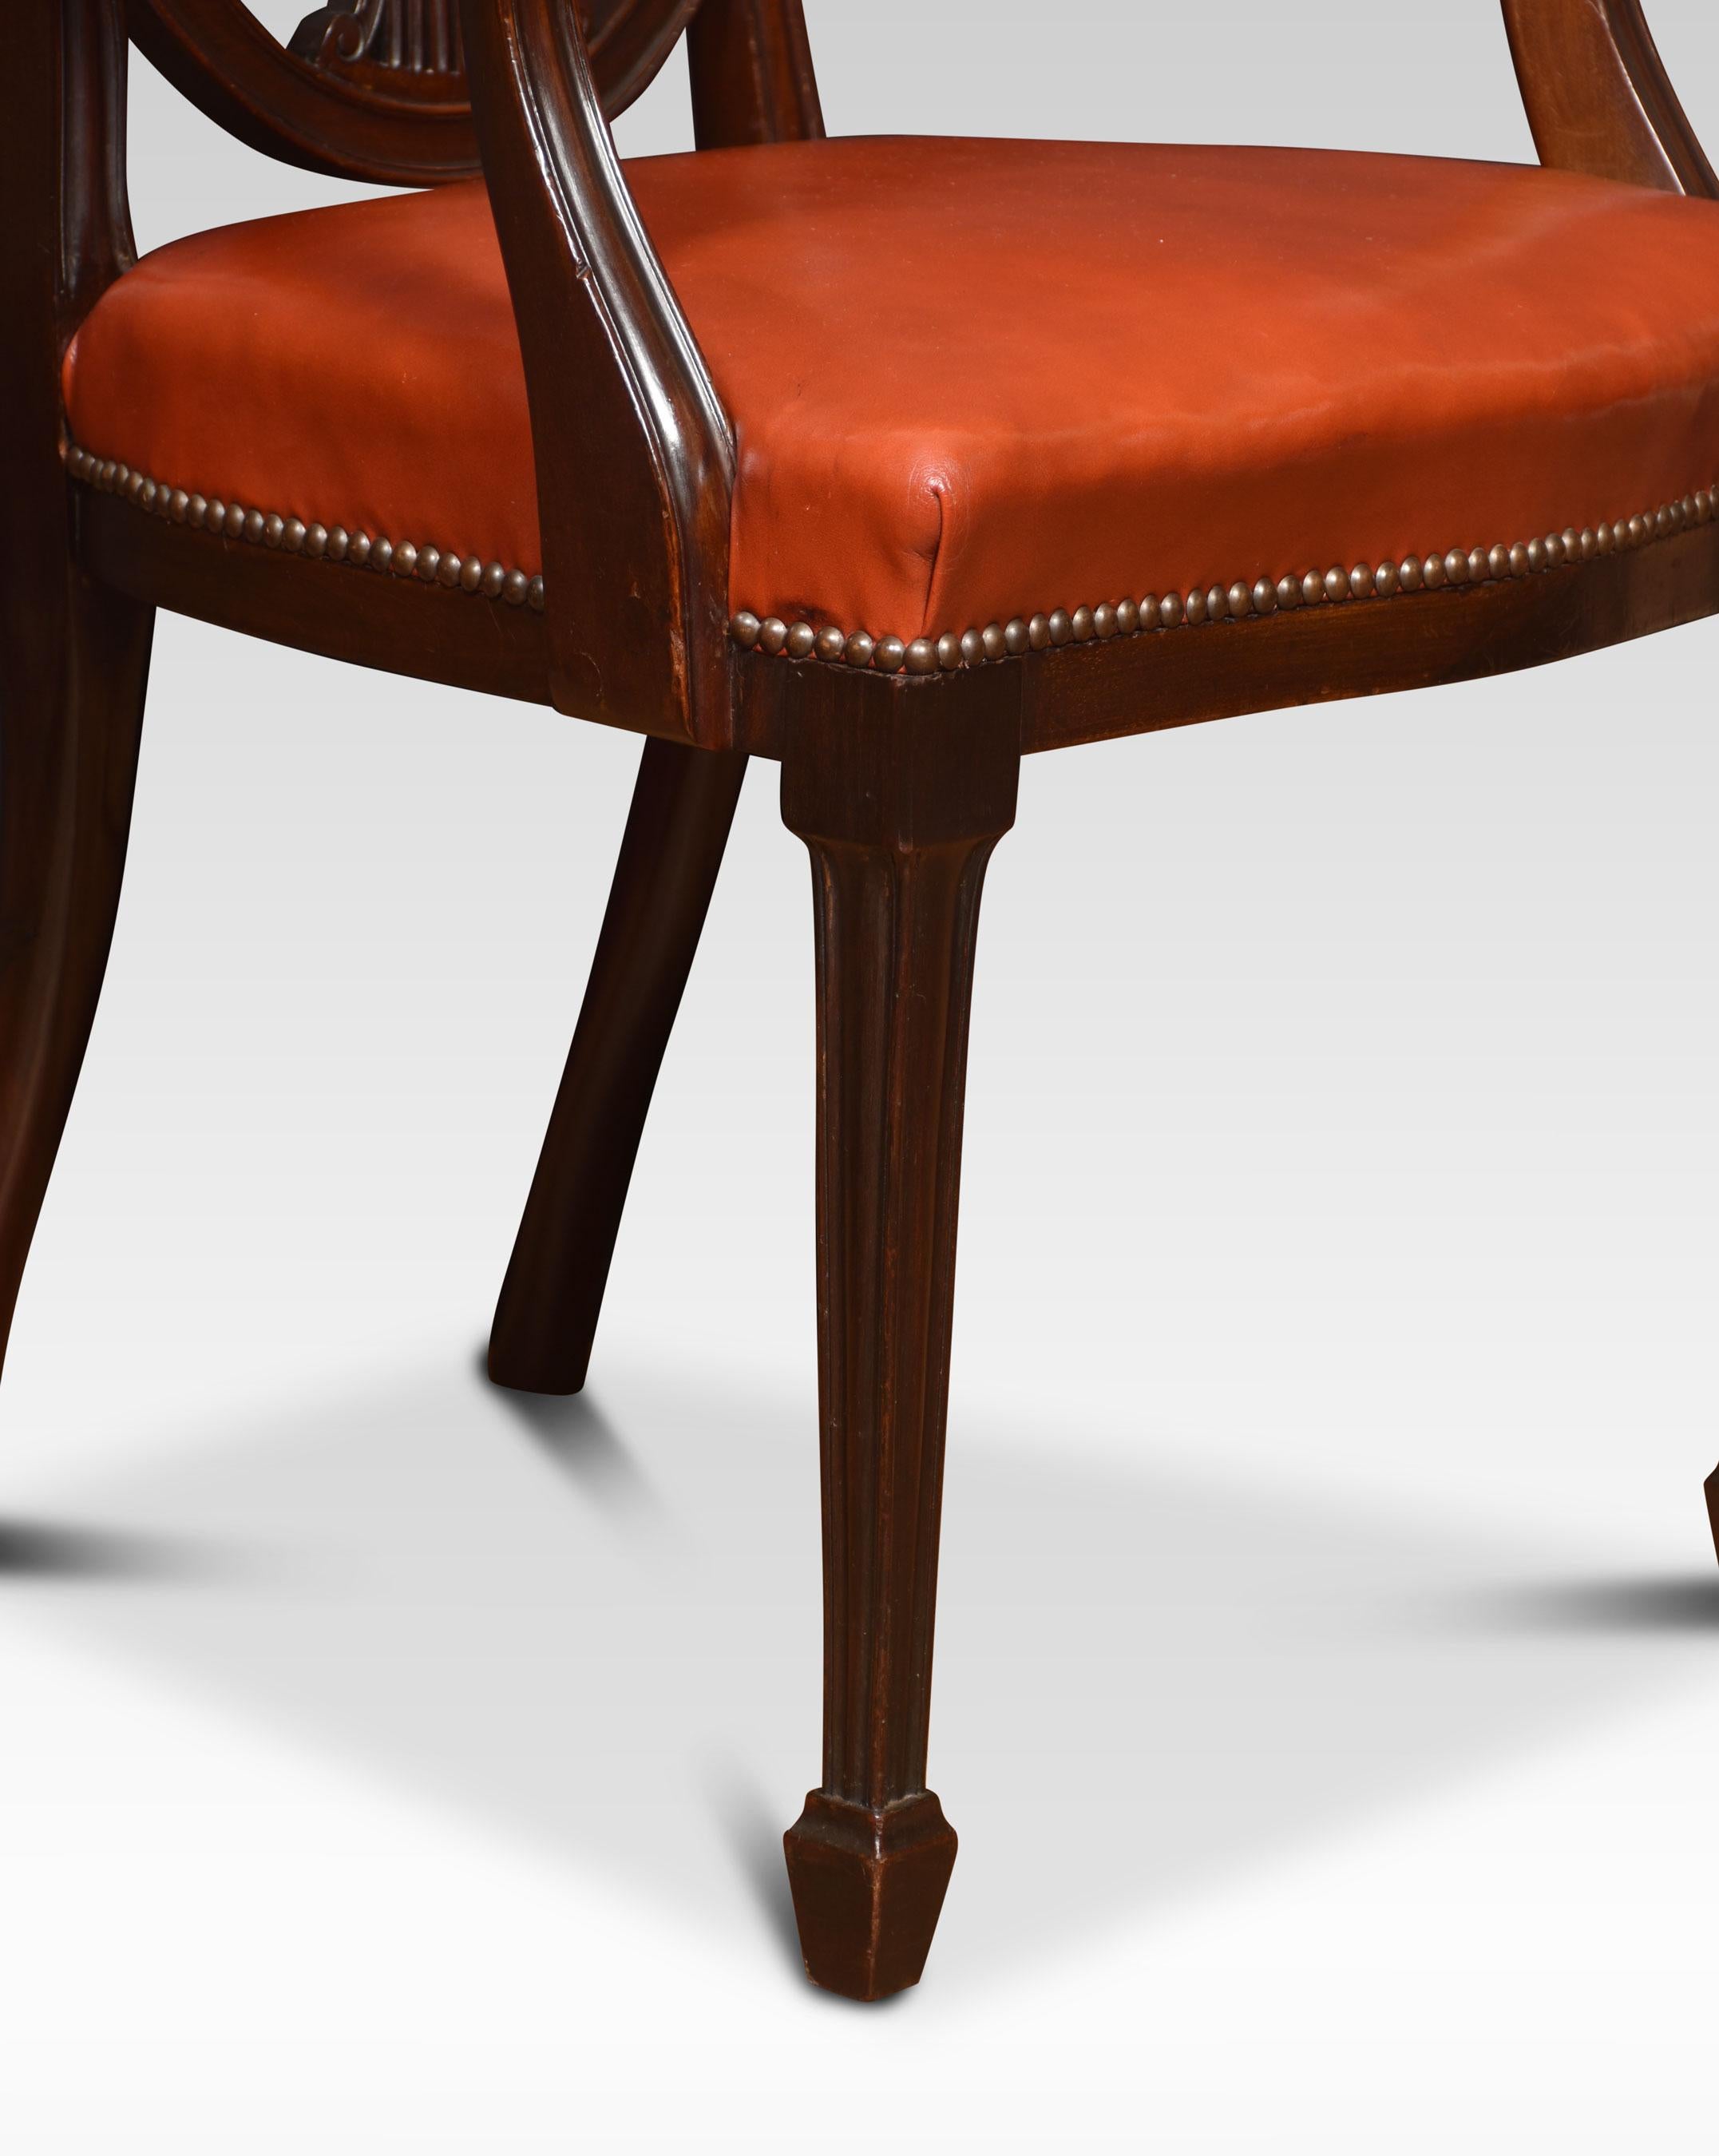 Eight Mahogany Shield Back Dining Chairs In Good Condition For Sale In Cheshire, GB